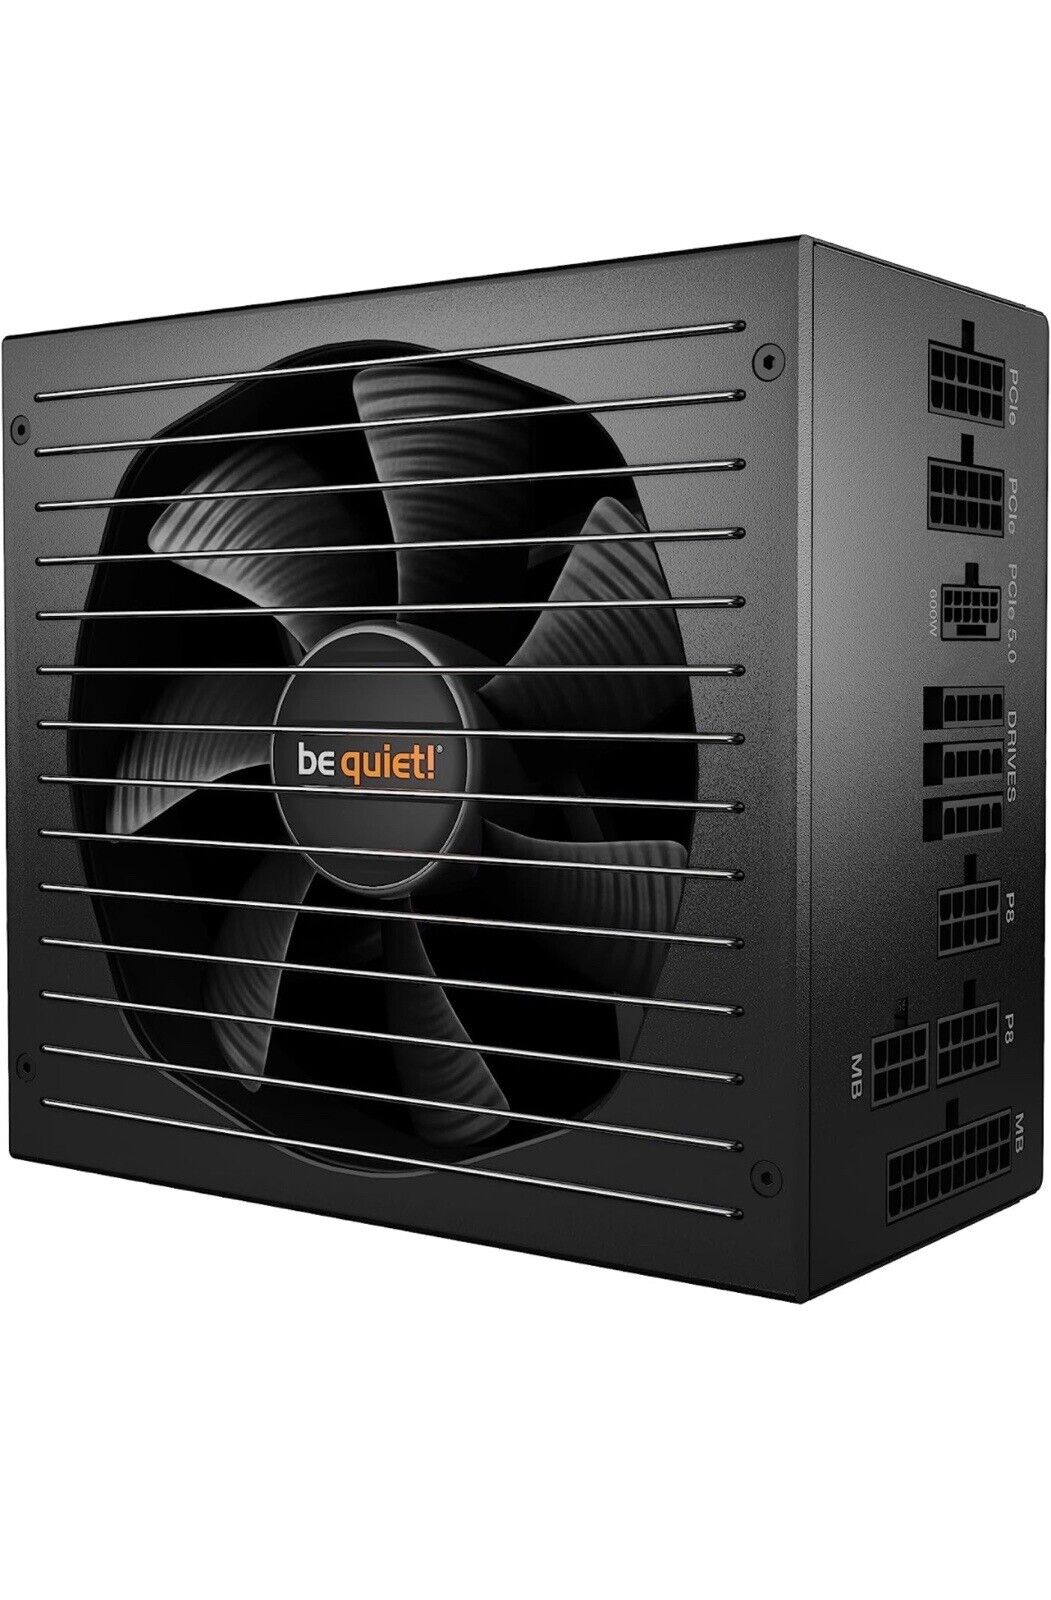 be quiet Pure Power 12 M 1000W 80 Plus Gold Power Supply